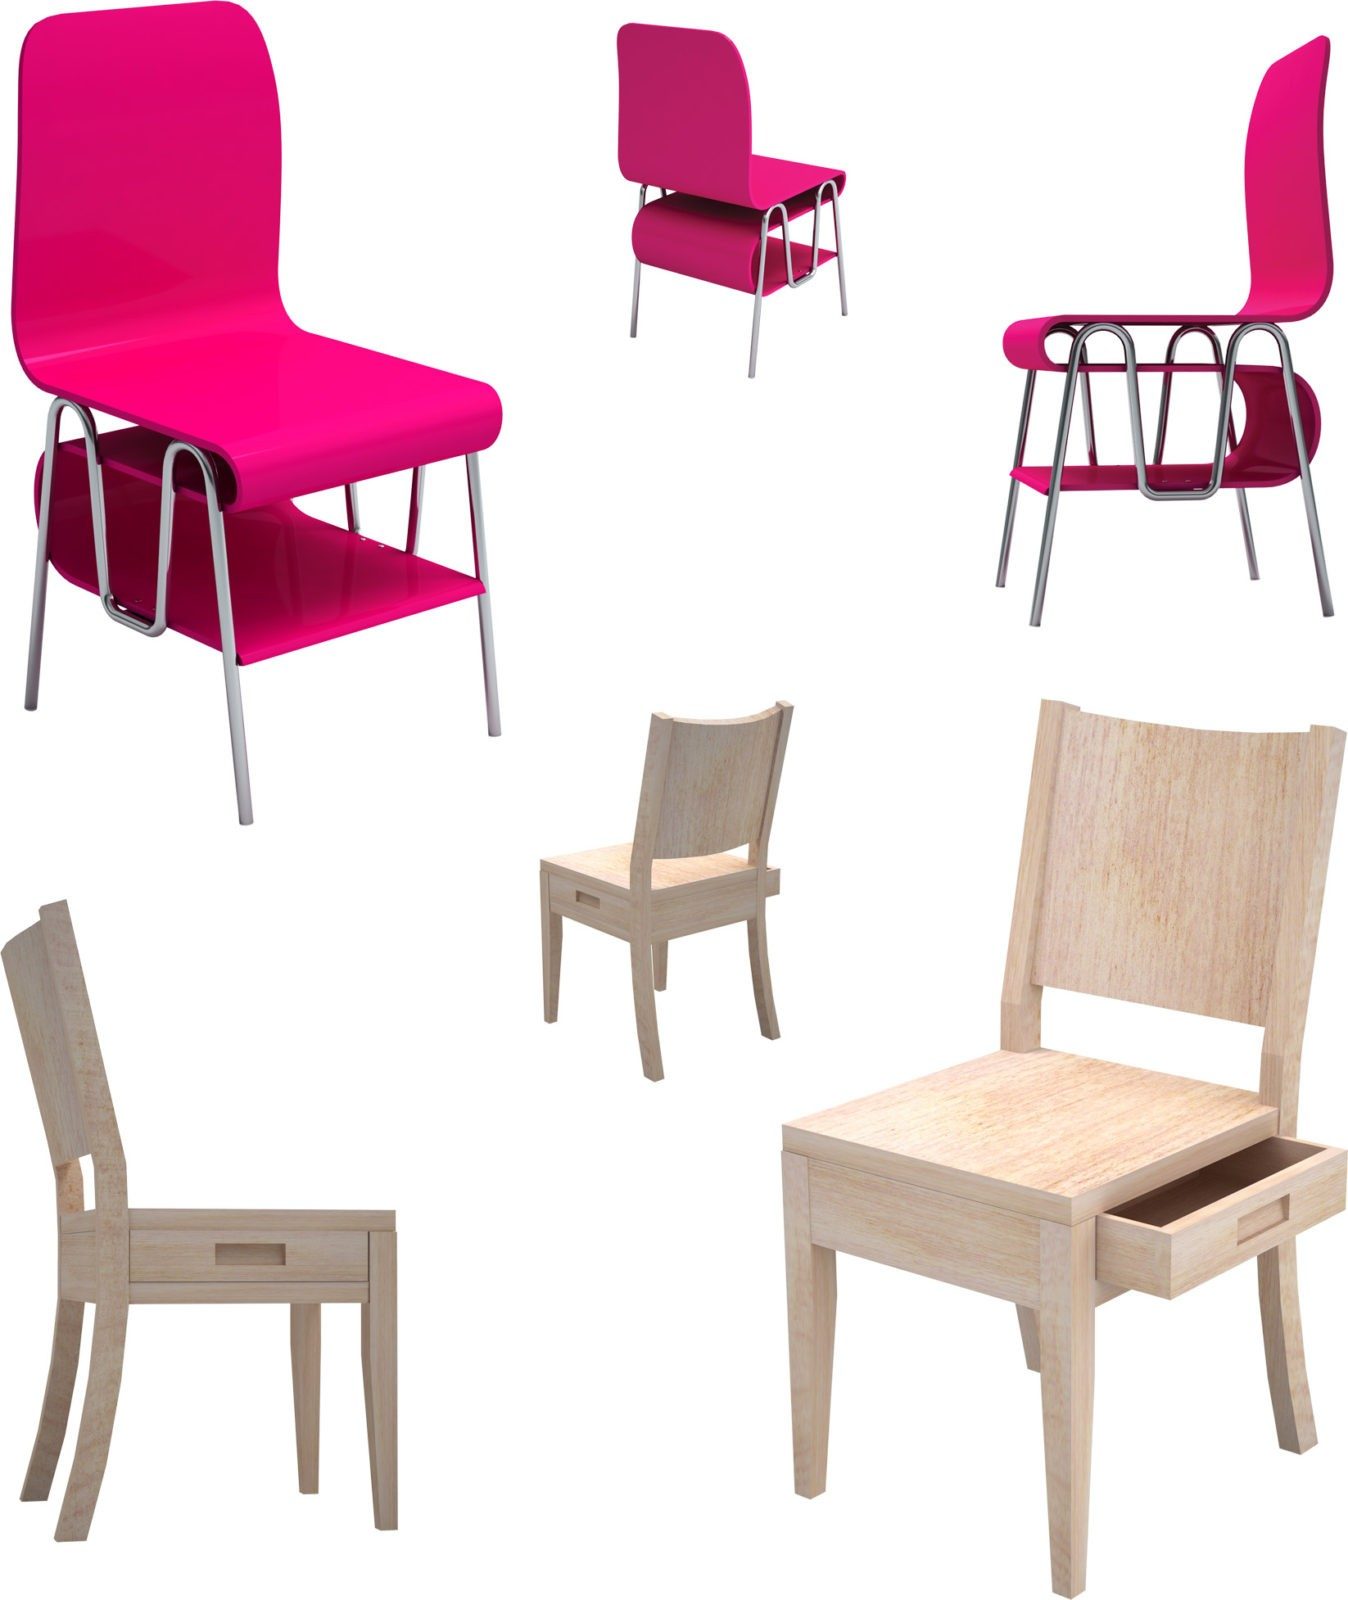 Concept of the chairs